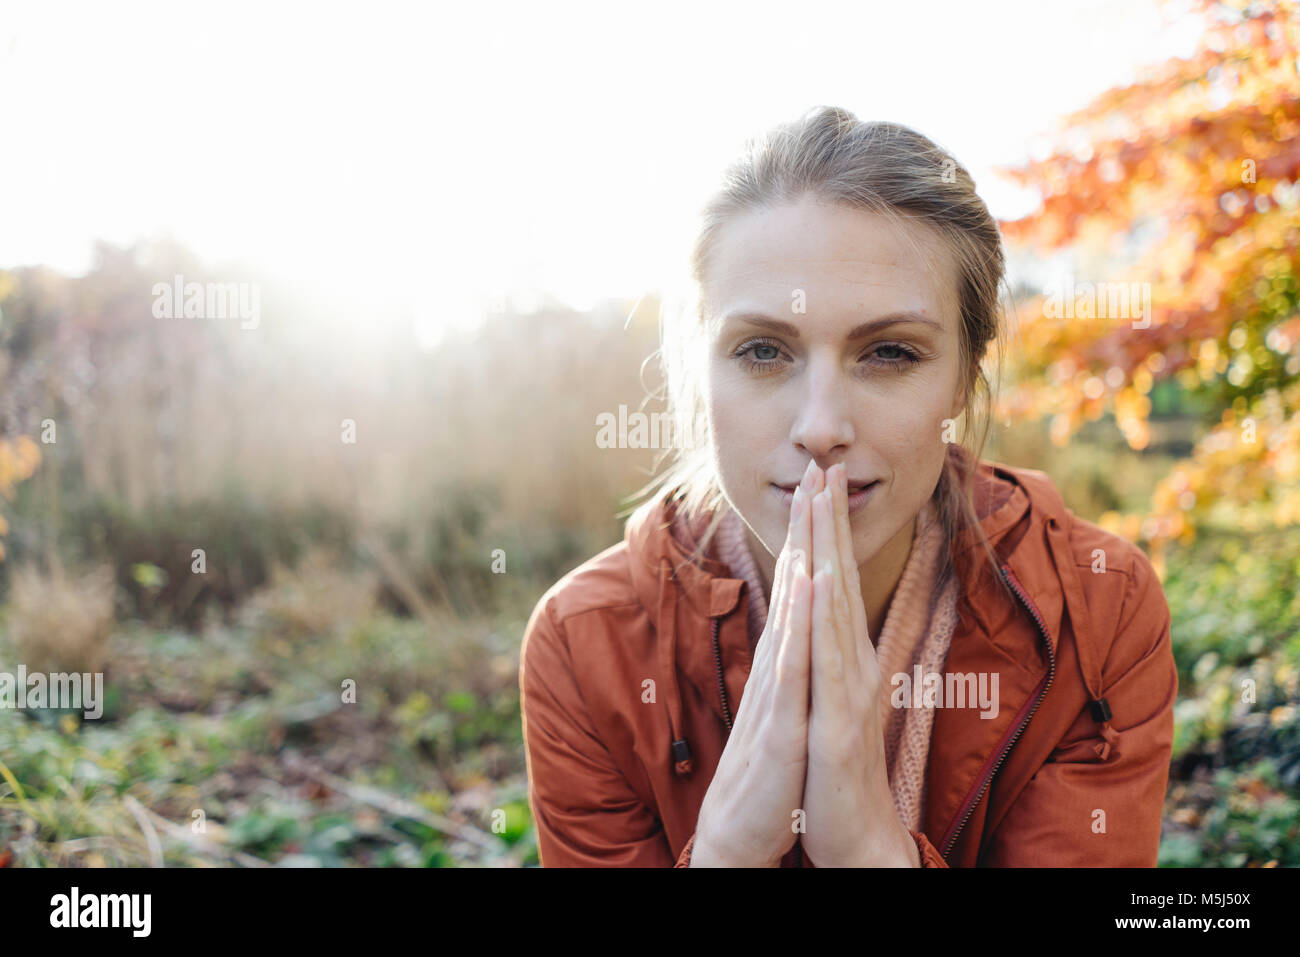 Portrait of young woman in autumnal park Stock Photo